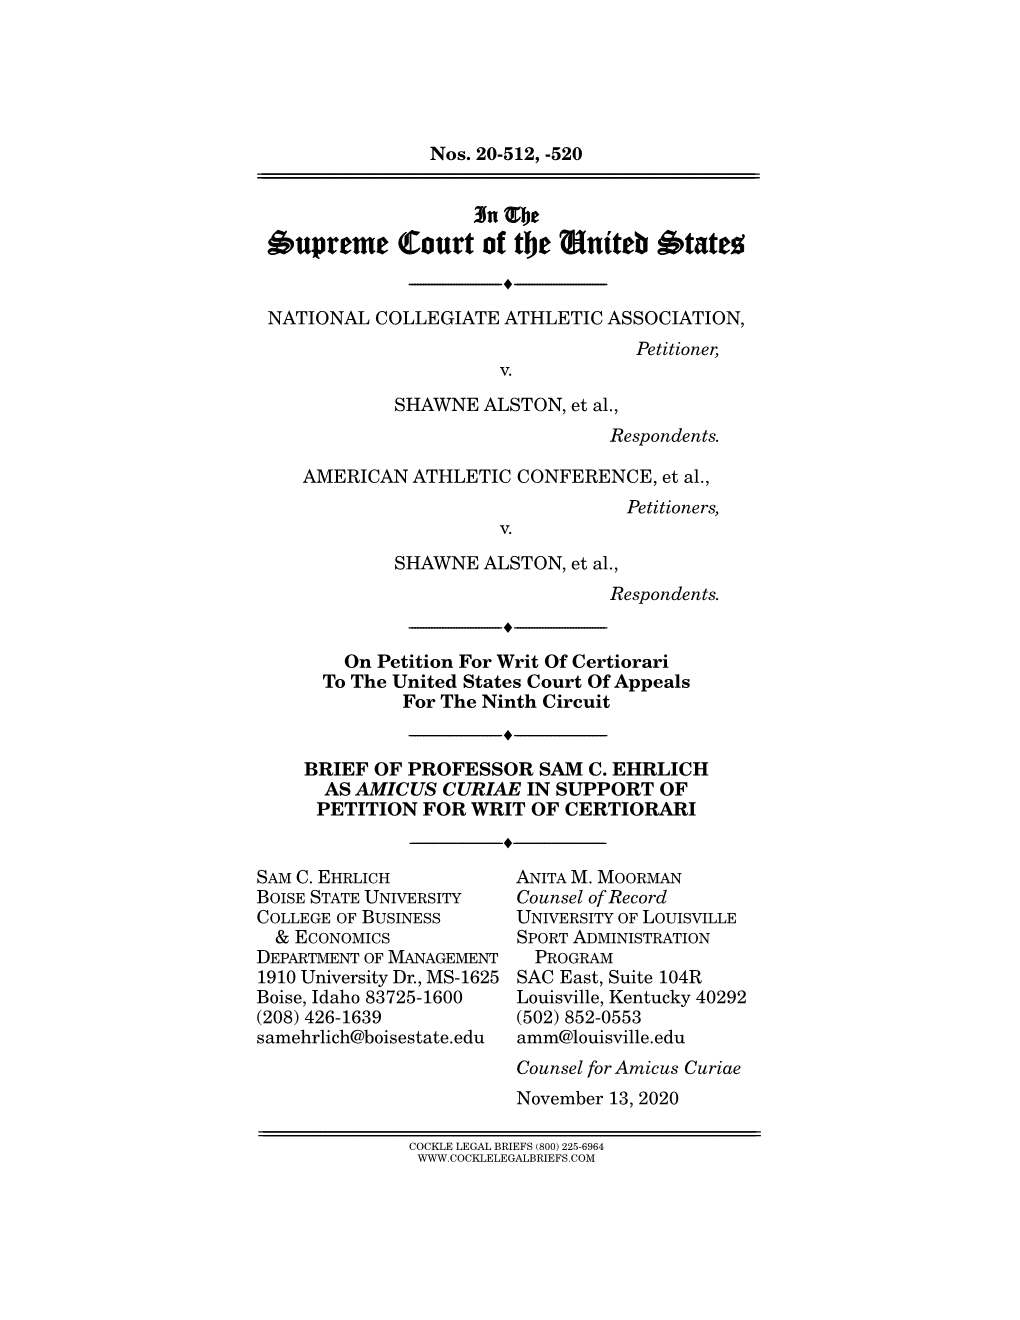 Supreme Court of the United States ------♦ ------NATIONAL COLLEGIATE ATHLETIC ASSOCIATION, Petitioner, V